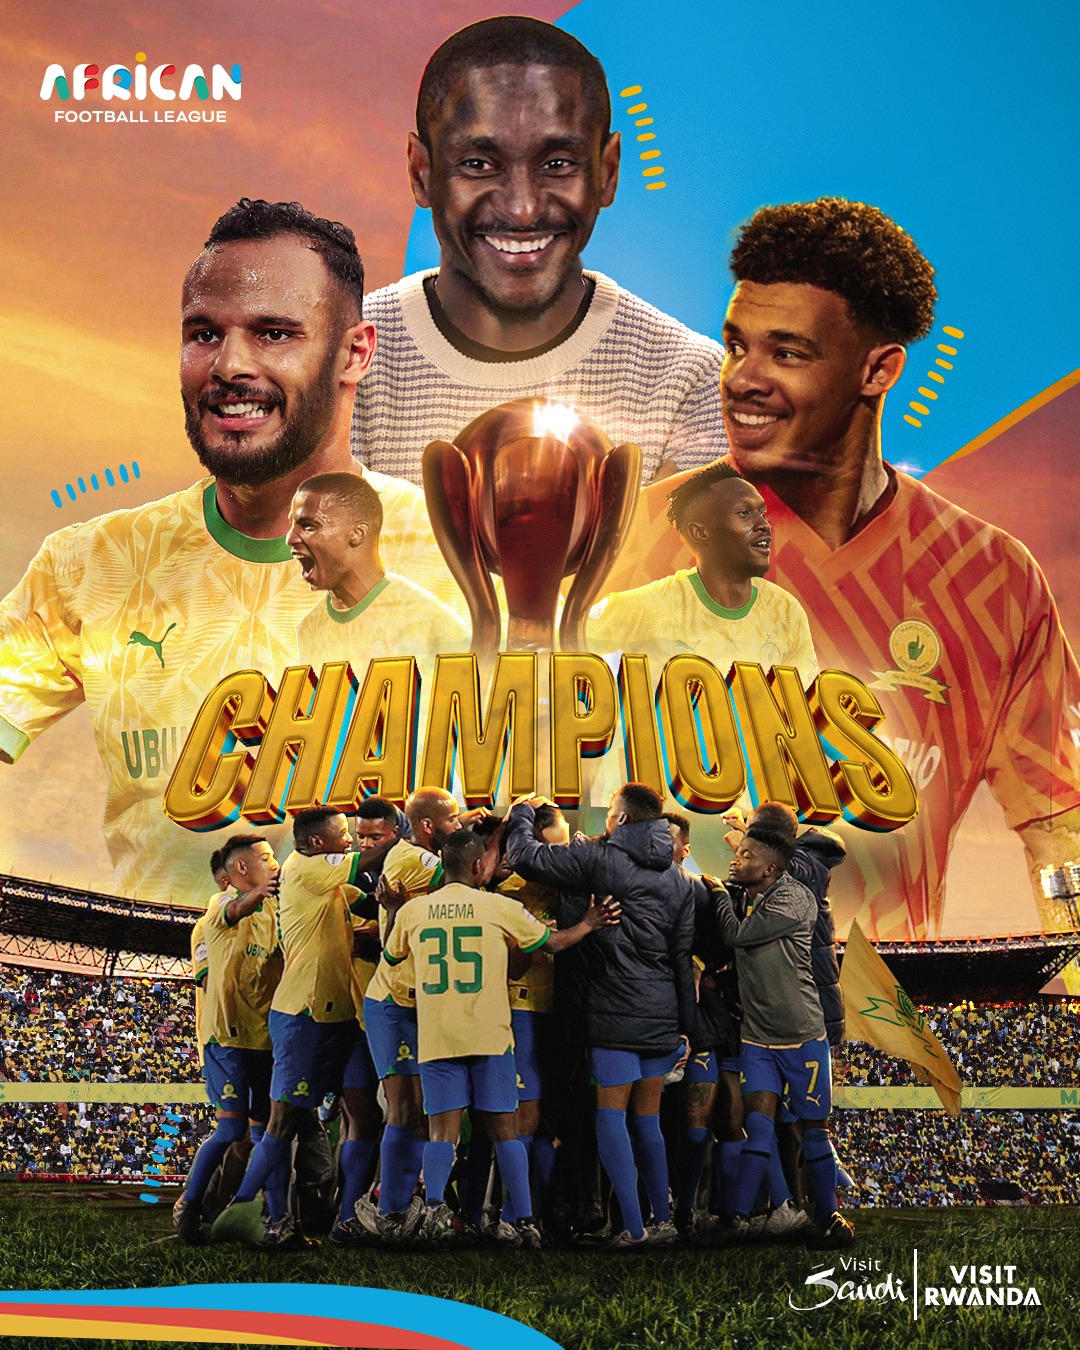 Mamelodi Sundowns crowned AFL champions as they see off Wydad